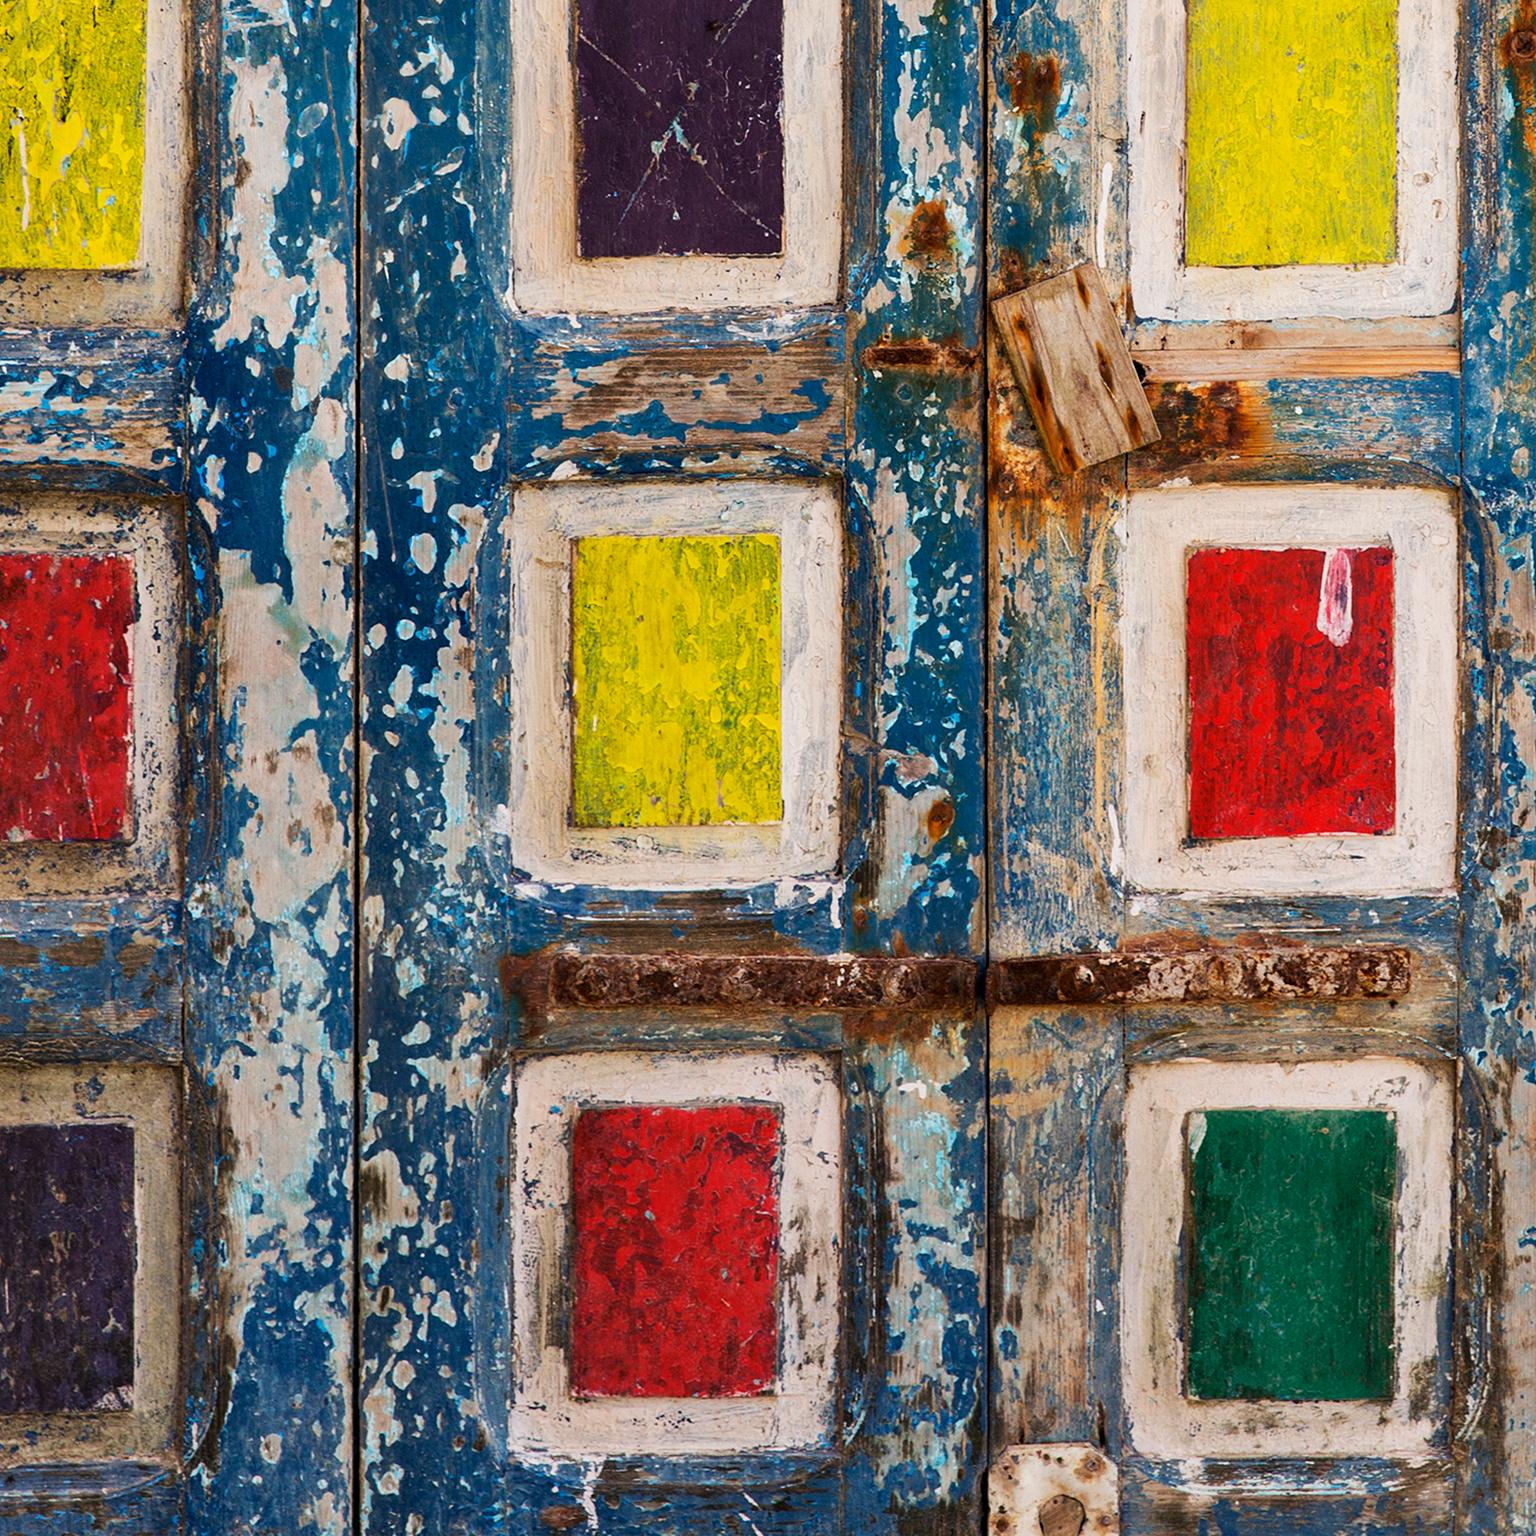 Painted Door, Morocco, 2016
Photograph by Cosmo Condina. A painted door in Essaouira, Morocco, 2016

Archival pigment print 19 X 12.6 in. Edition of 10. This is # 3/10 in the edition.

Colour photograph of a weathered doorway, peeling paint and